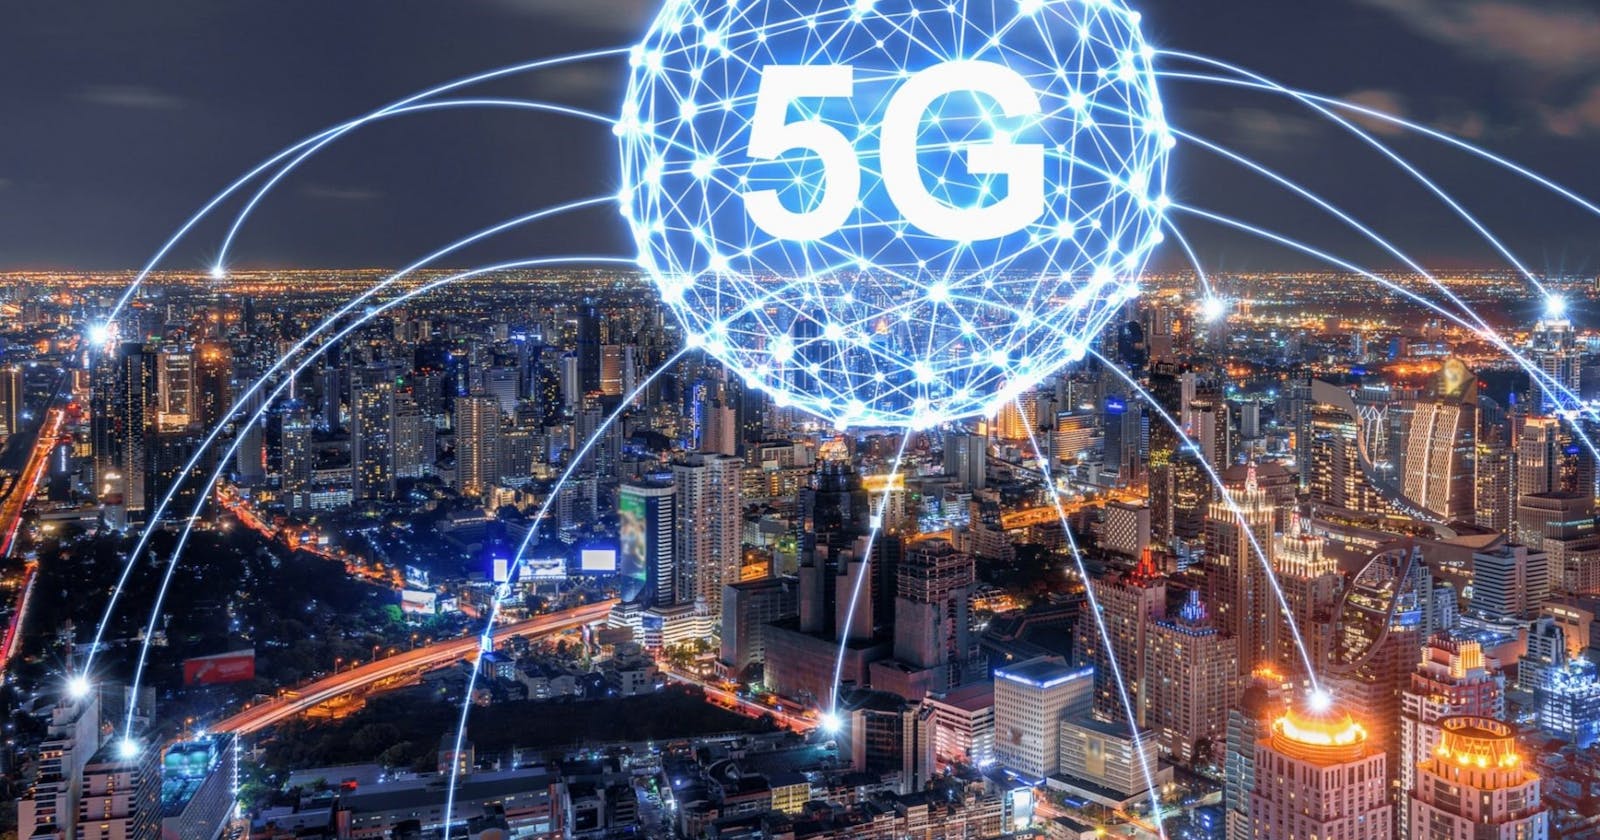 5g Technology: Opportunities And Challenges
(a Nigerian Case Study)